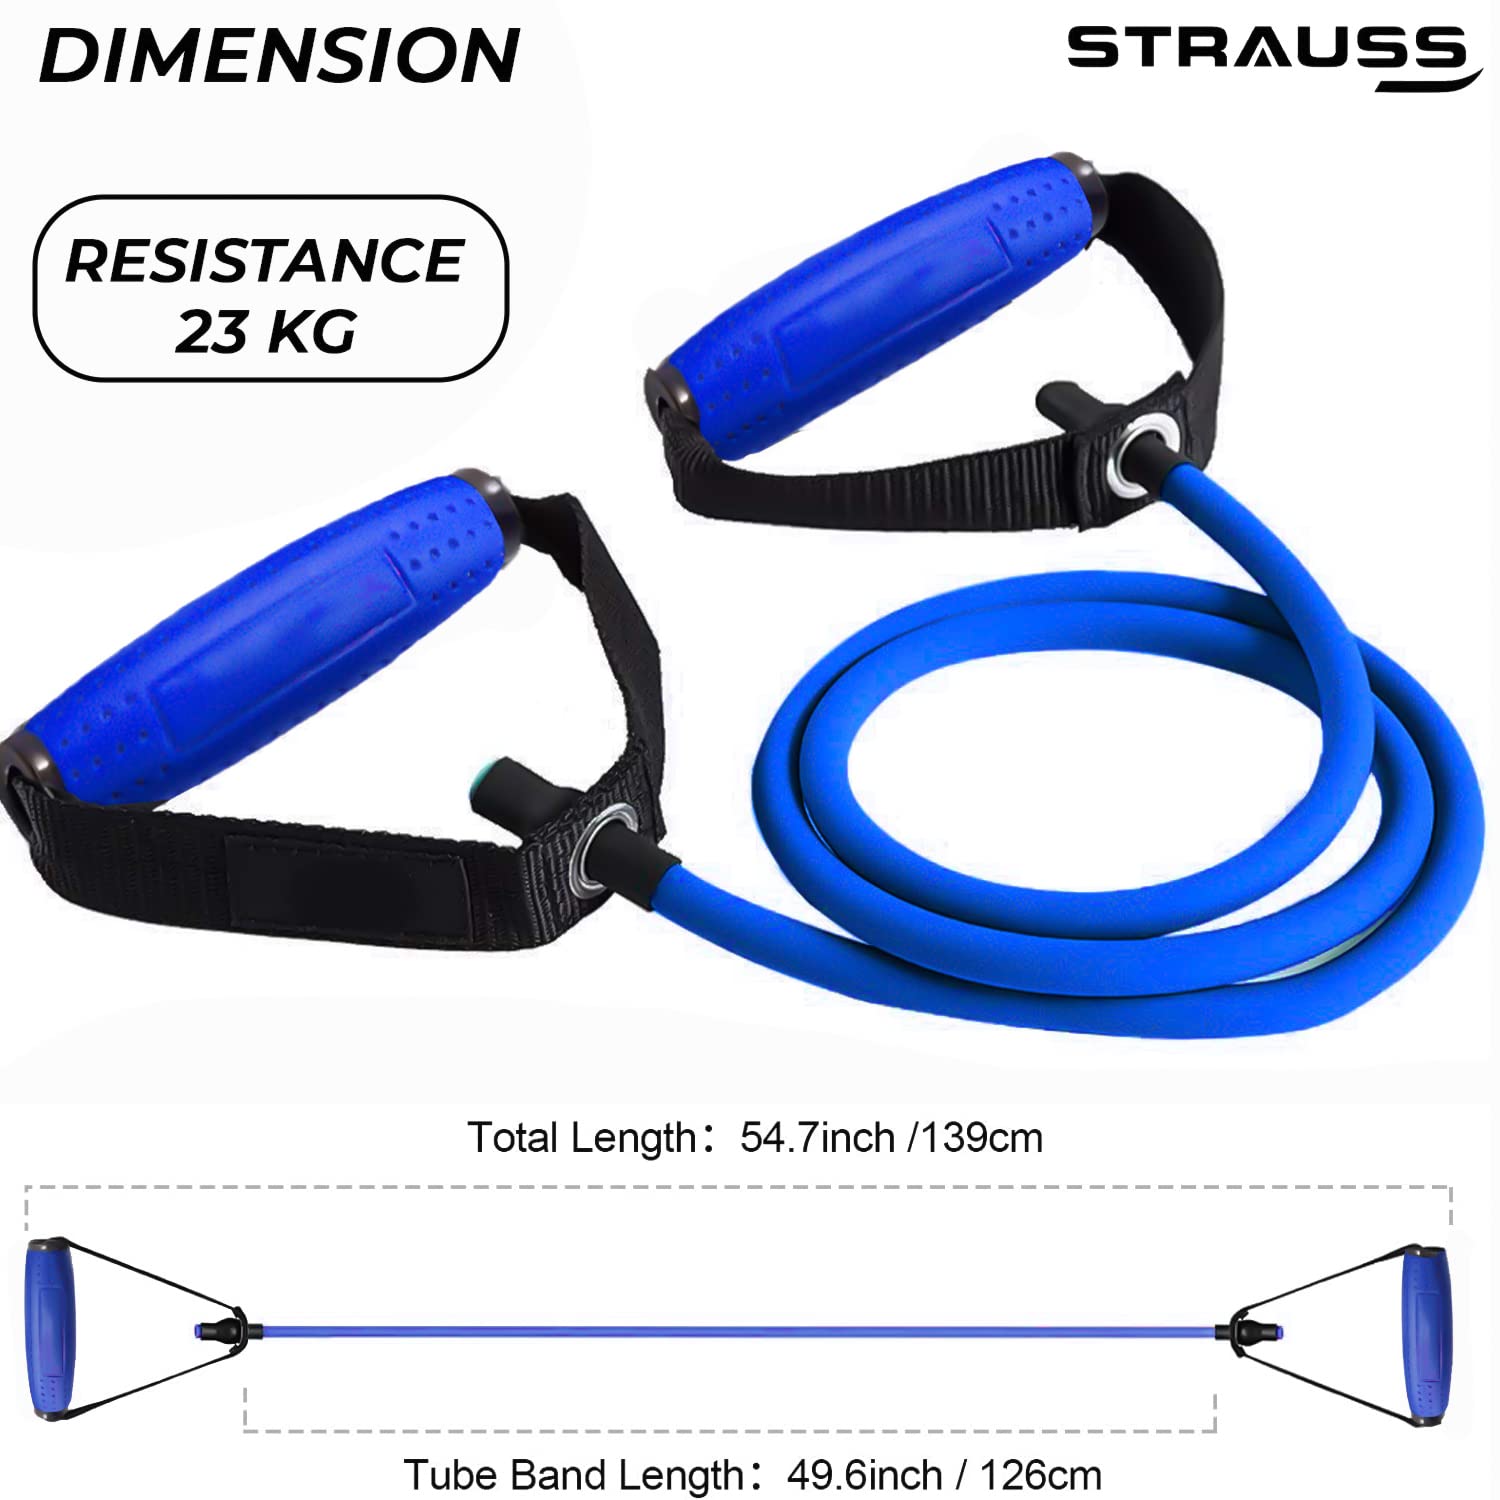 Strauss Single Resistance Tube with PVC Handles, Door Knob & Carry Bag, 22 Kg, (Blue)